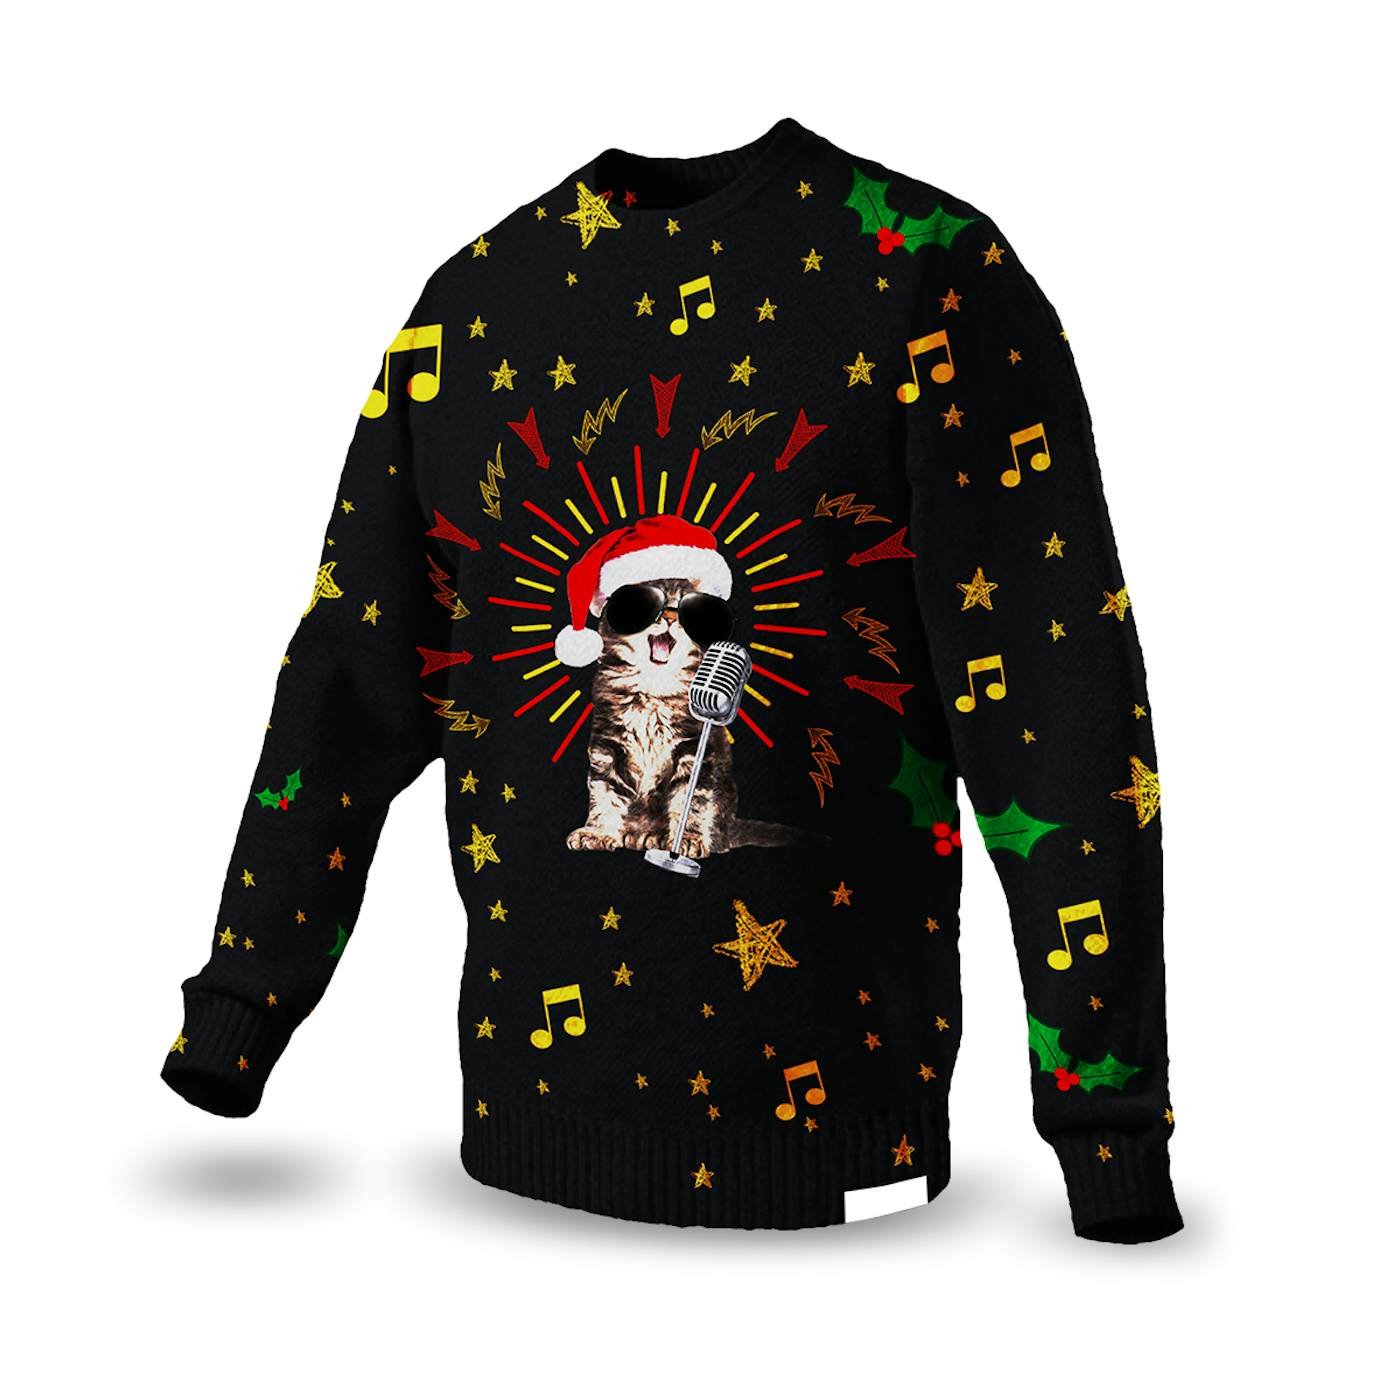 Rob Halford - Celestial Knitted Christmas Sweater